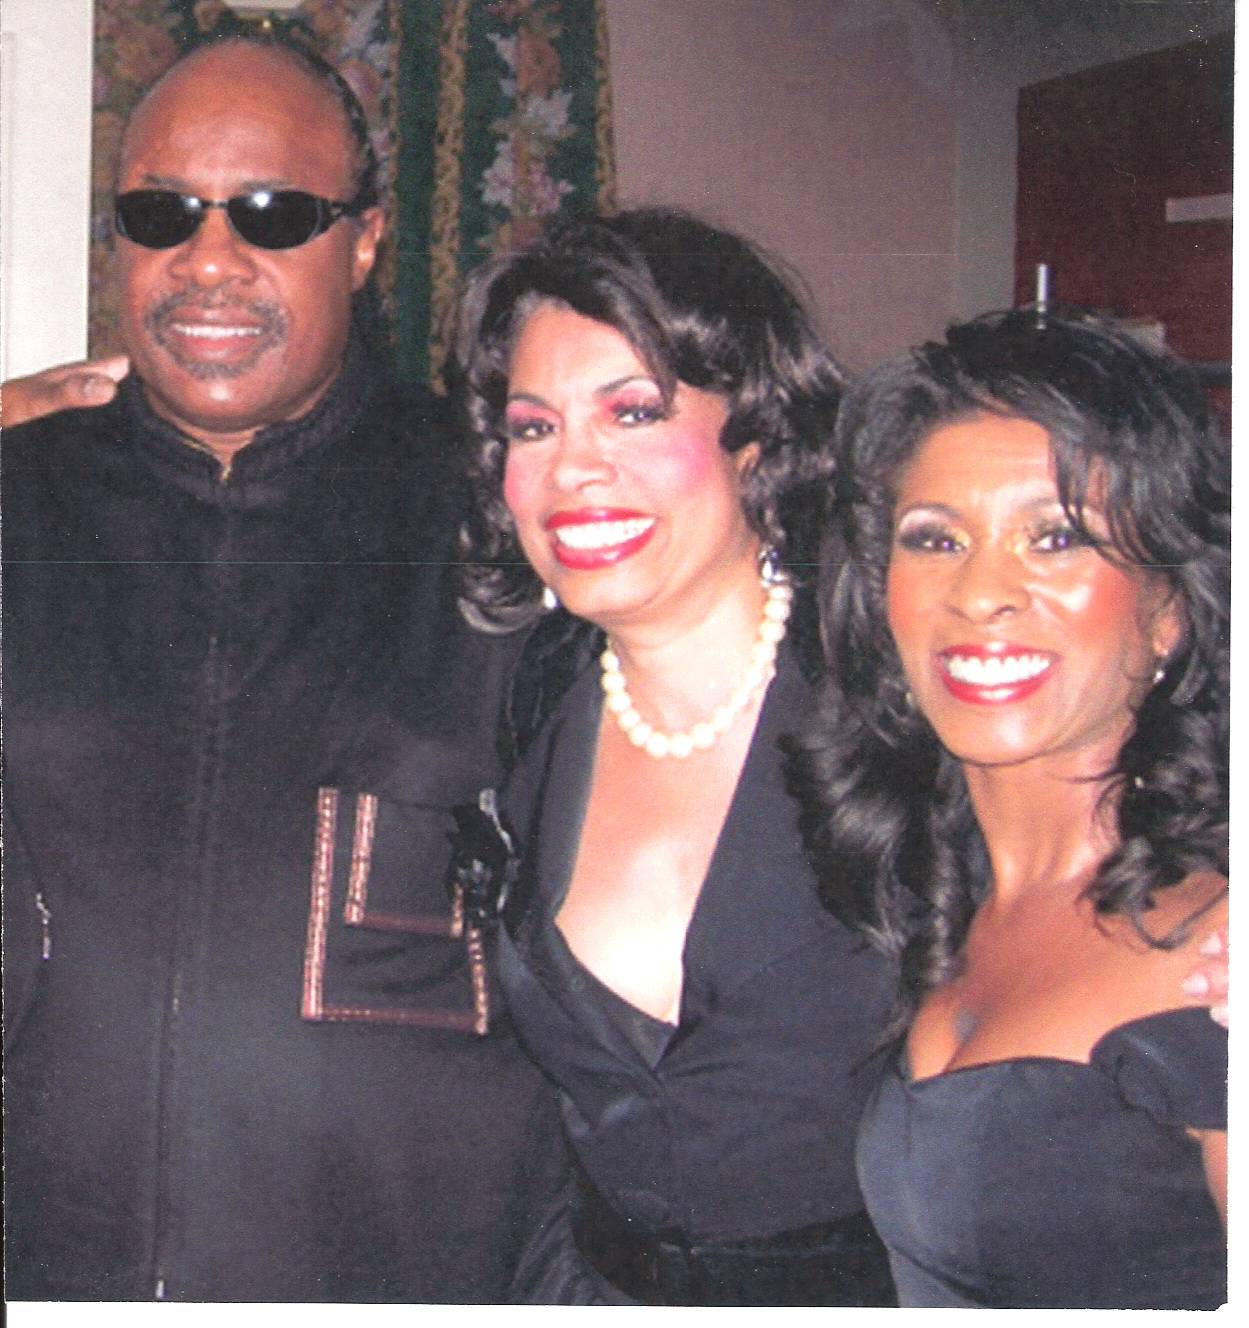 A backstage visit after the show from Stevie Wonder.